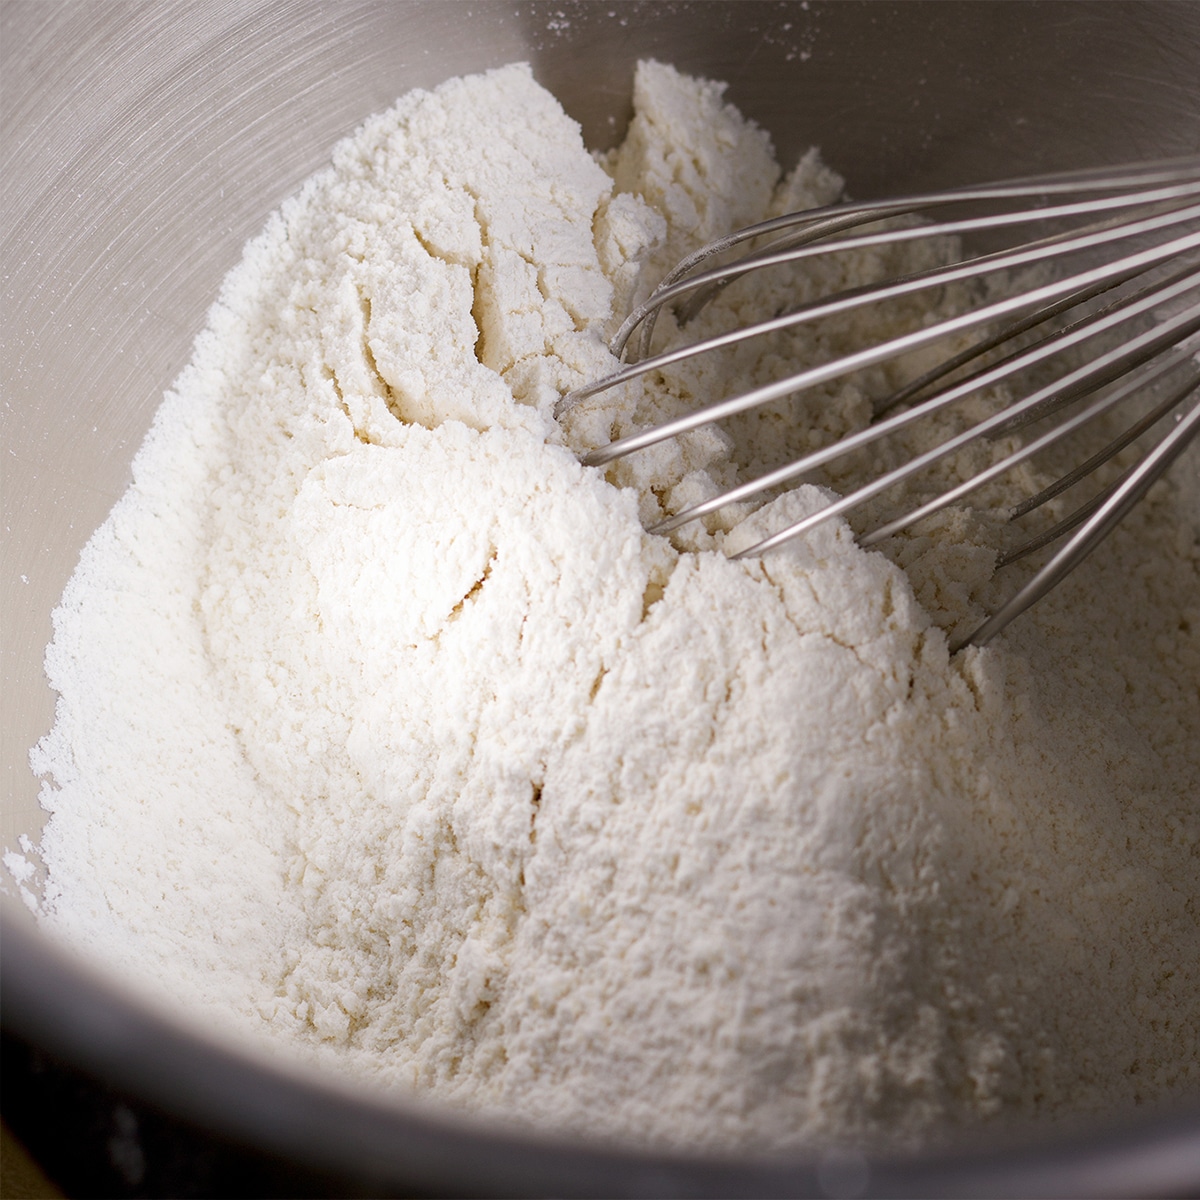 Someone using a wire whisk to mix flour and sugar in a mixing bowl.